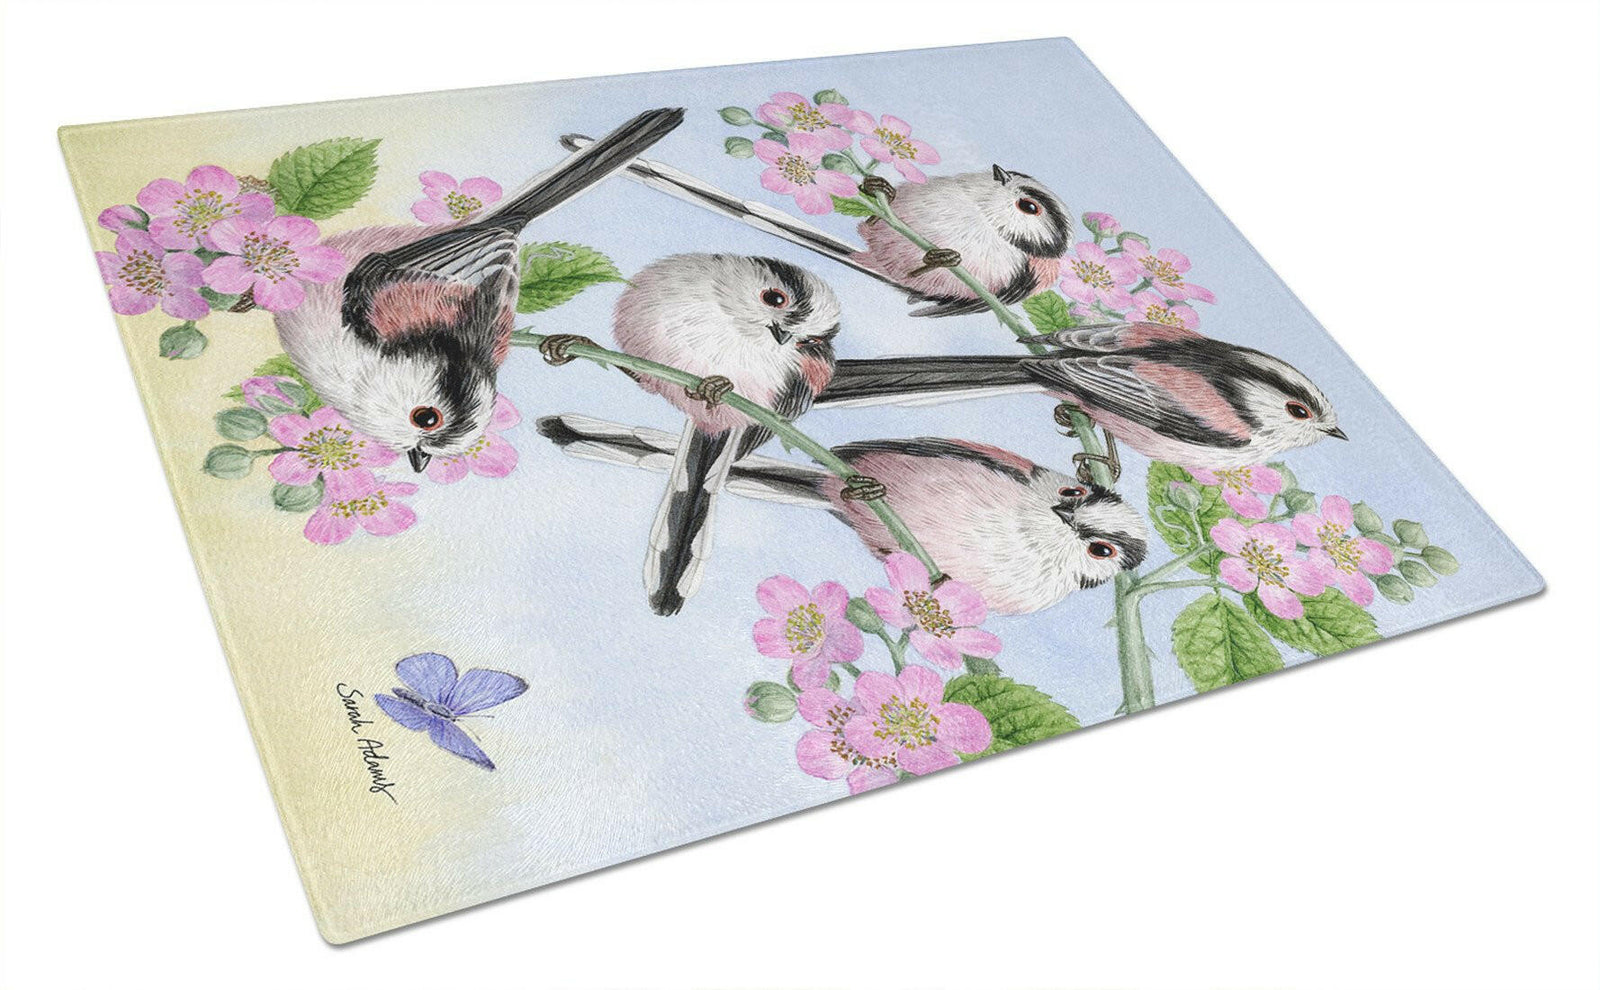 Party of 5 Long Tailed Tits Glass Cutting Board Large ASA2163LCB by Caroline's Treasures